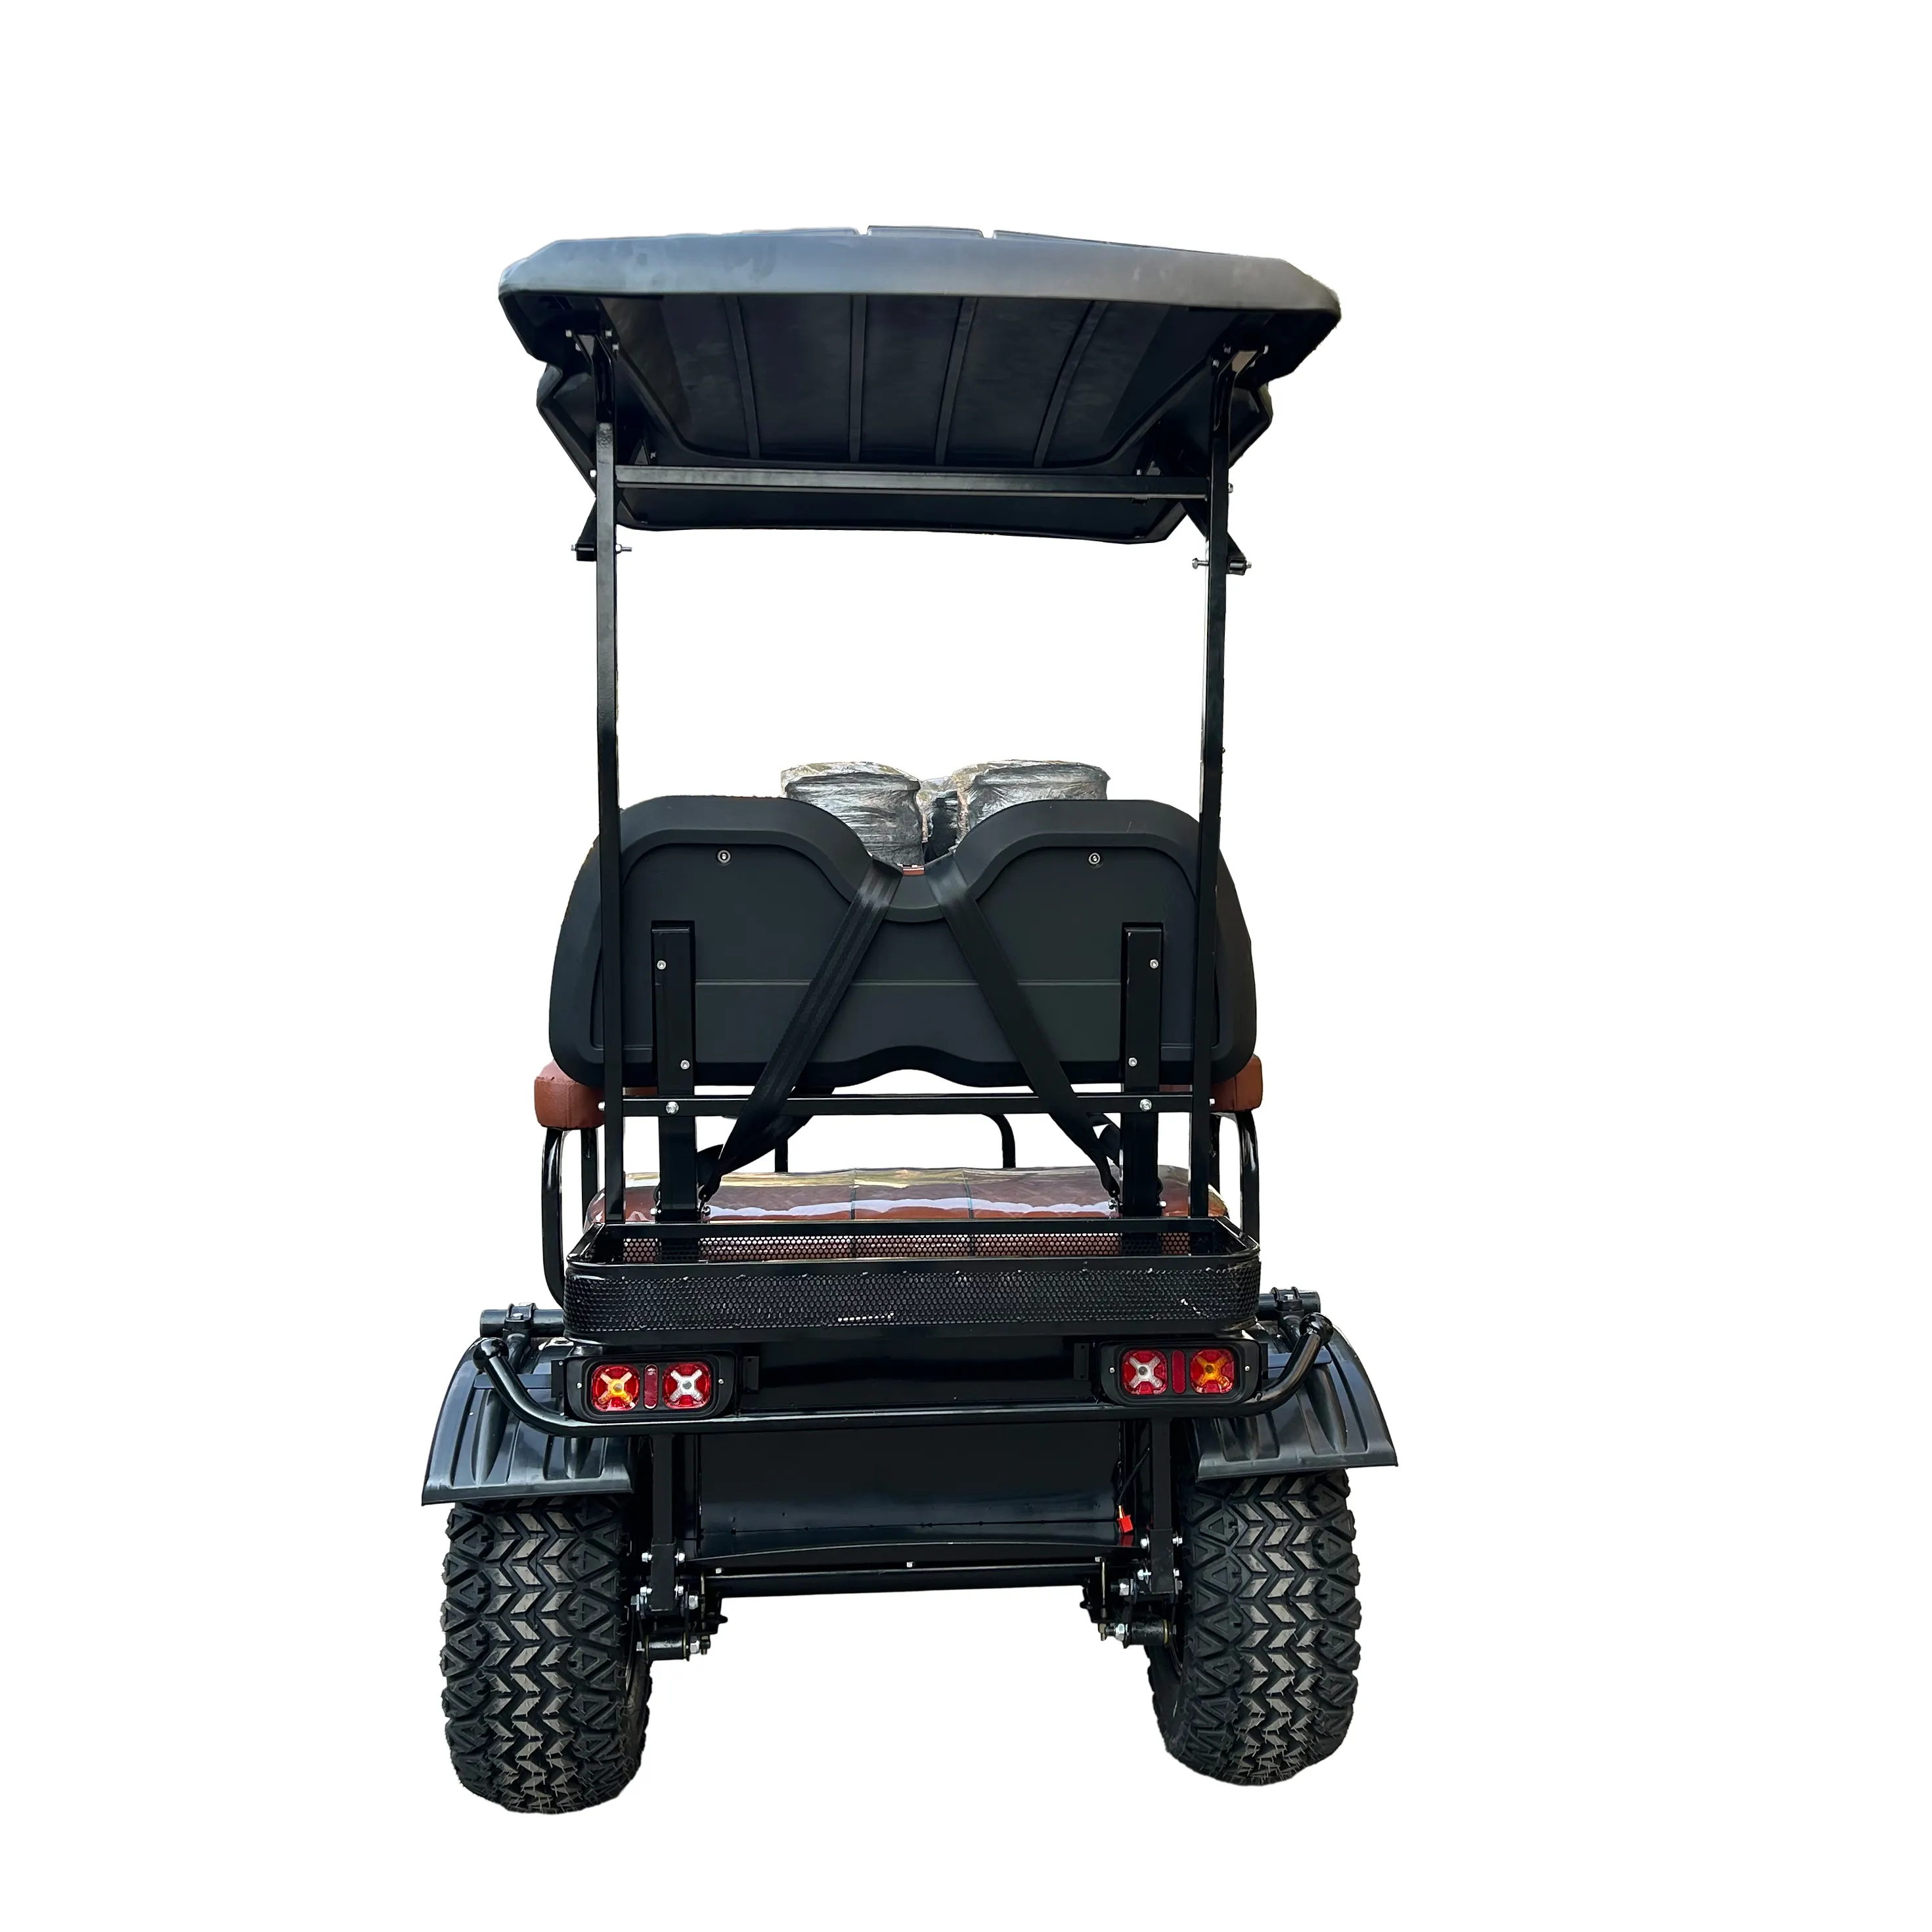 Shining Brand Automotive level lighting combination design golf cart 2 seaters golf carts trailers